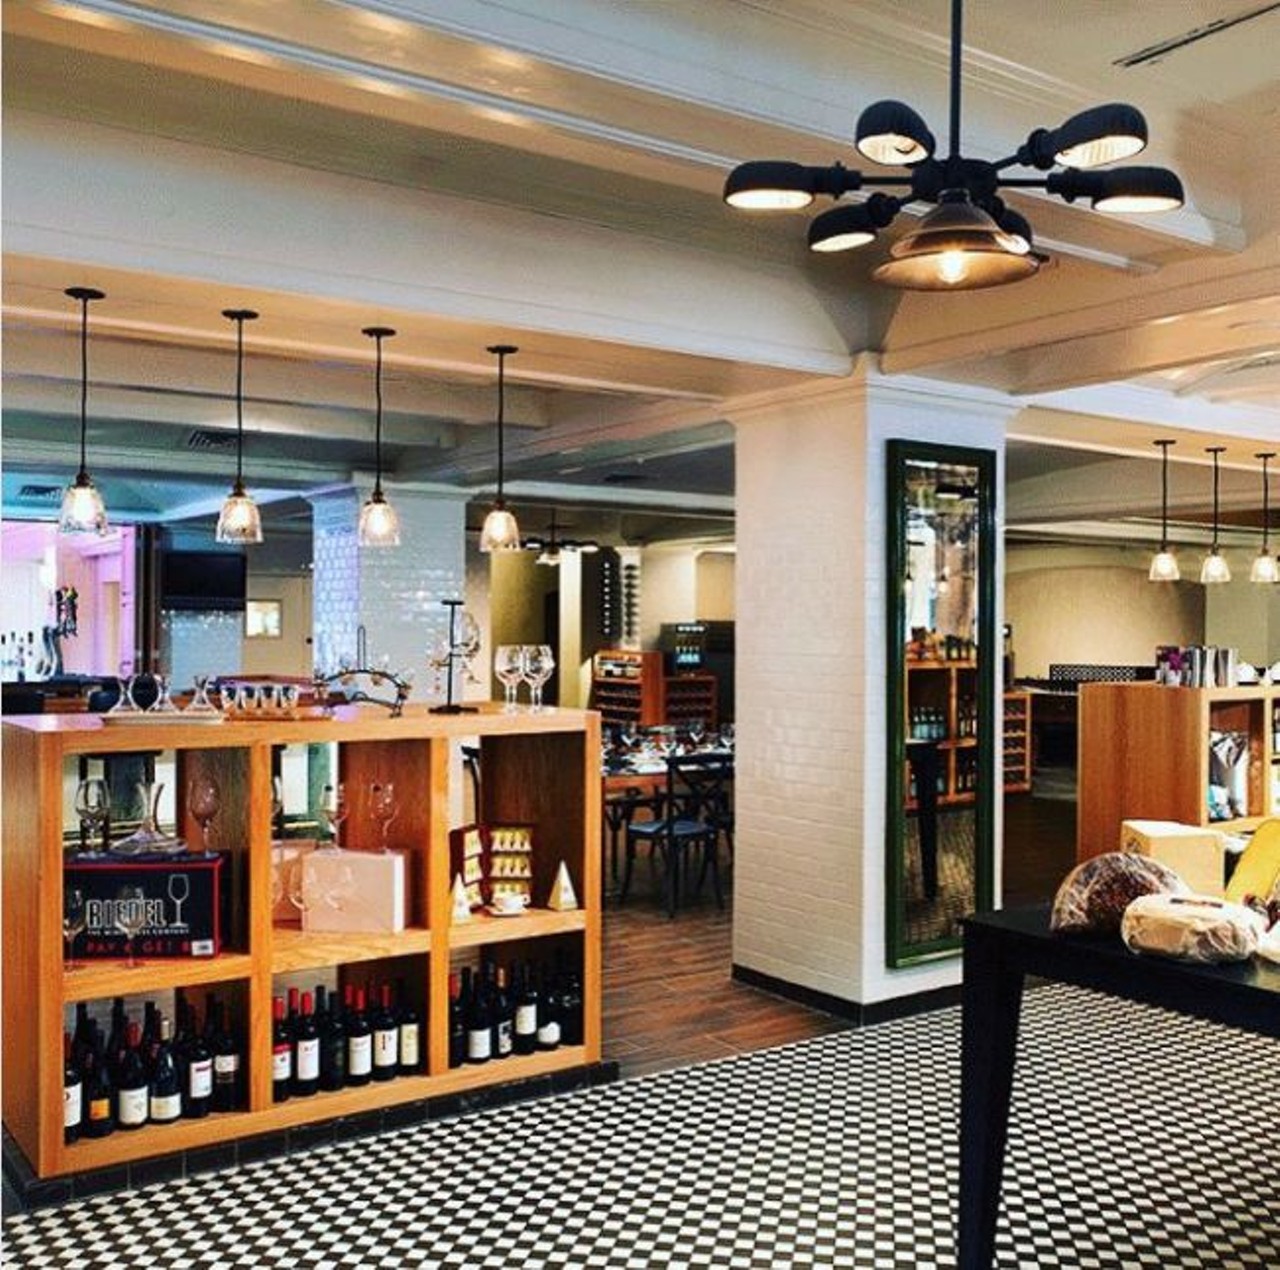 Market on Houston
205 E Houston St., (210) 554-1721
The Market on Houston is simple, modern and offers one of the largest wine menus in the downtown area.
Photo via Instagram, marketonhouston